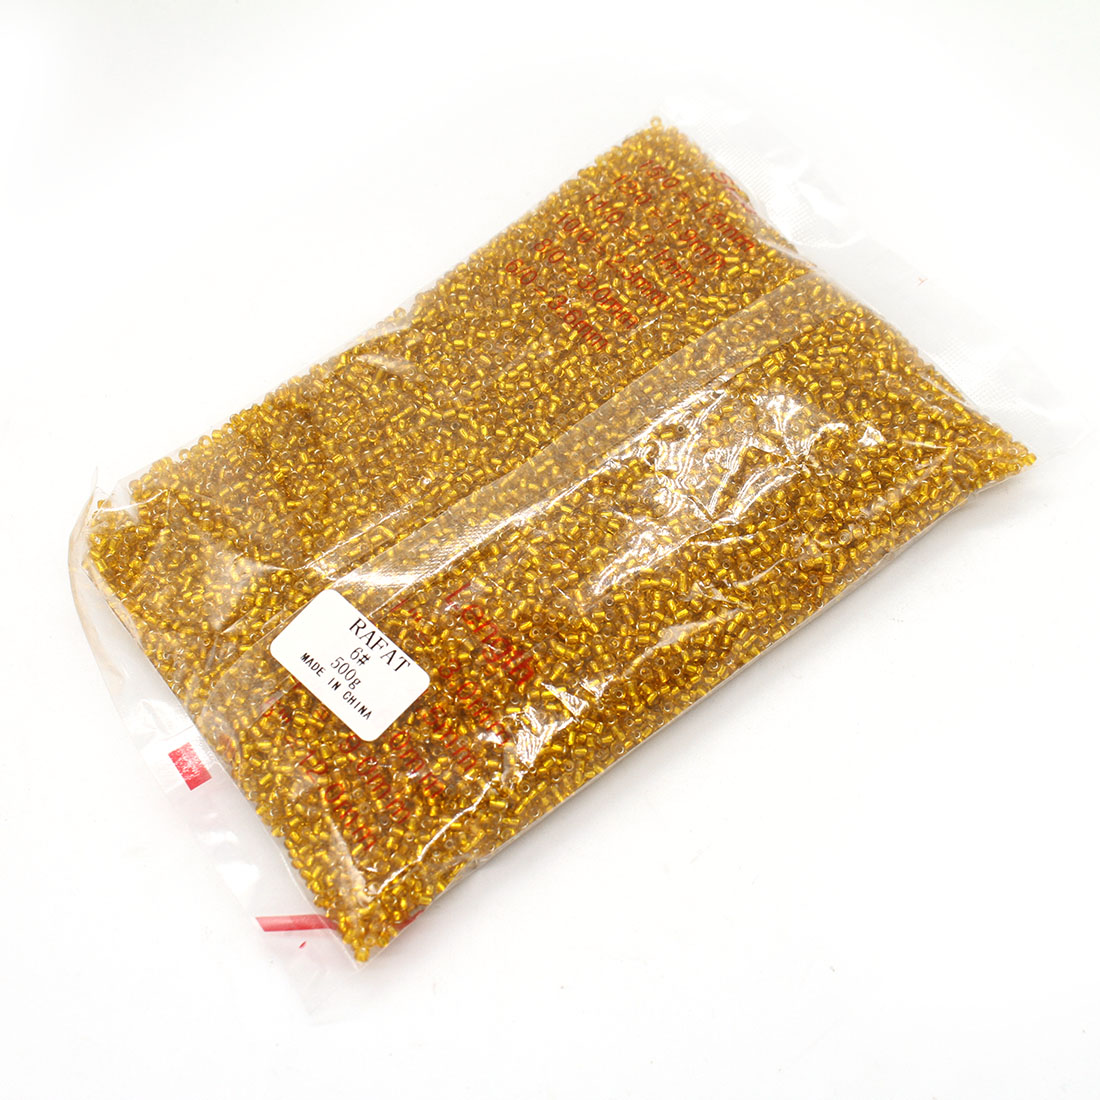 Real gold 3mm 10,000 packs